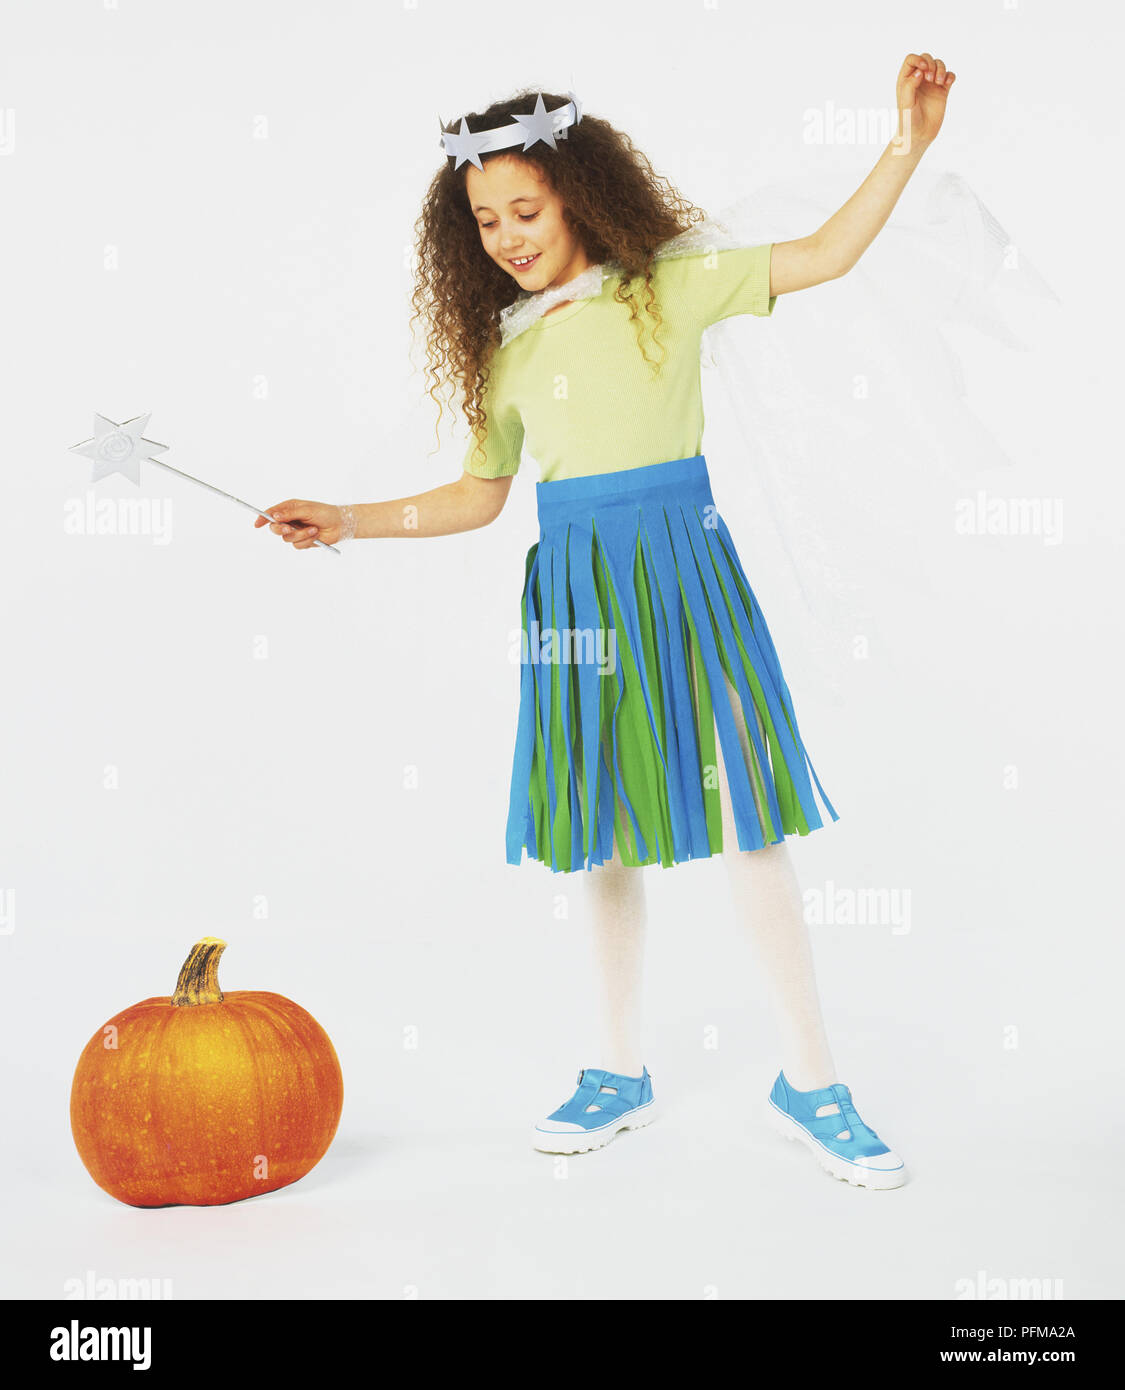 Smiling girl in fairy costume standing and waving wand at pumpkin on the floor, front view Stock Photo